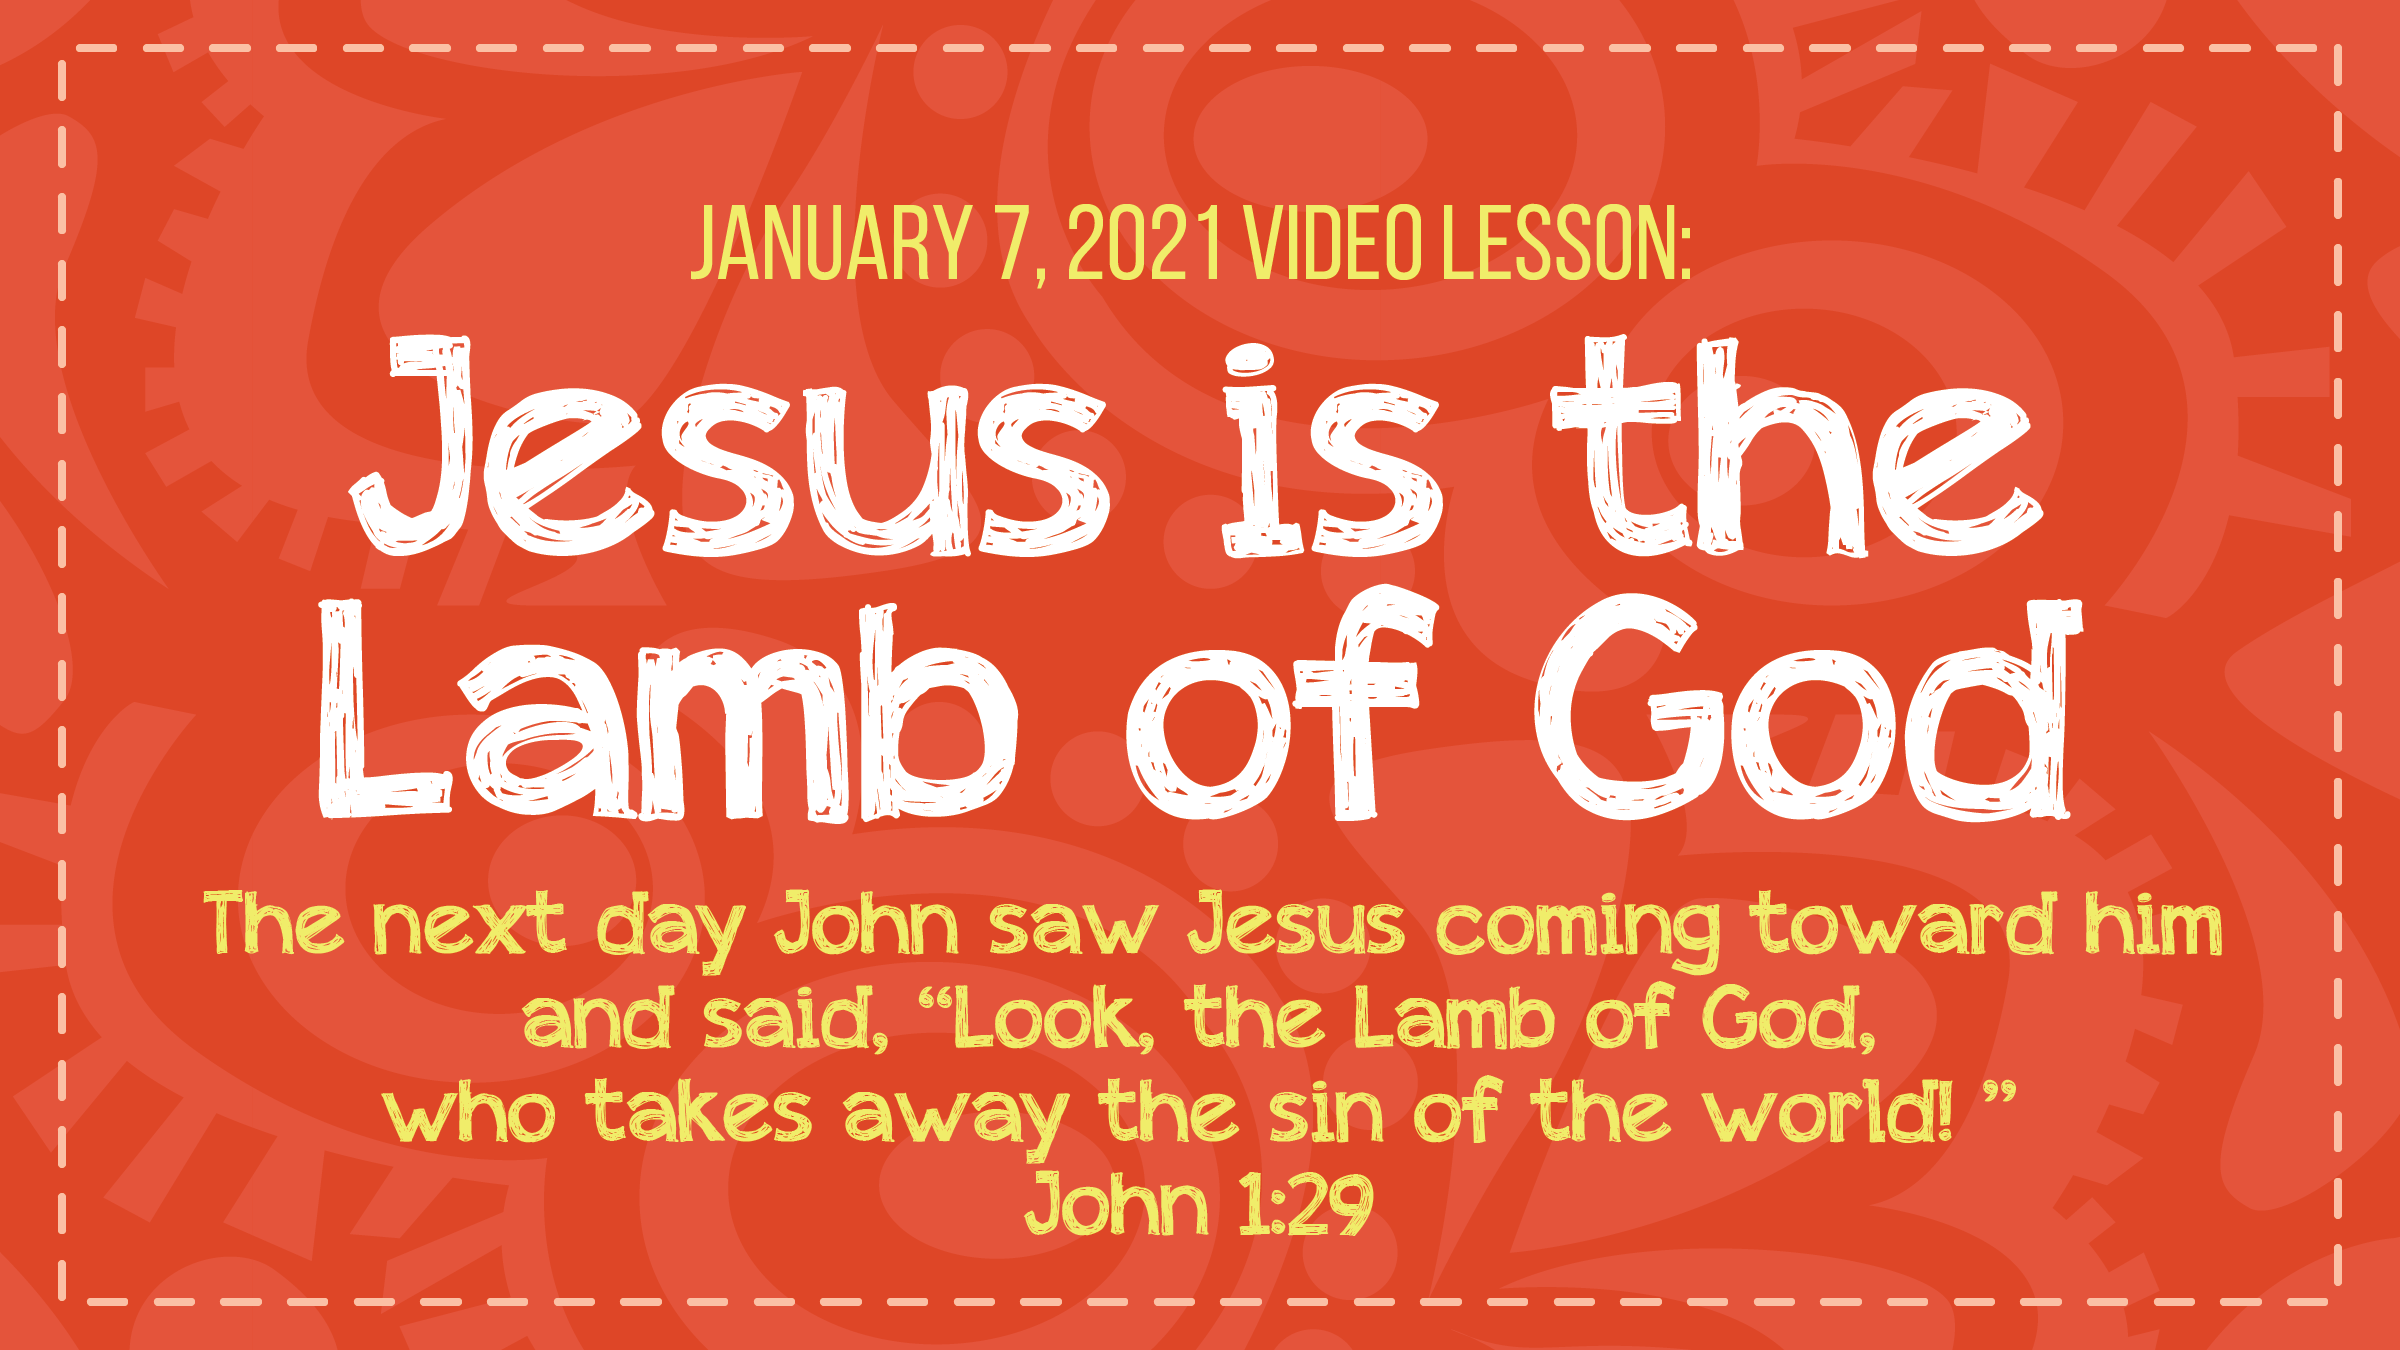 January 7, 2021 Video Lesson